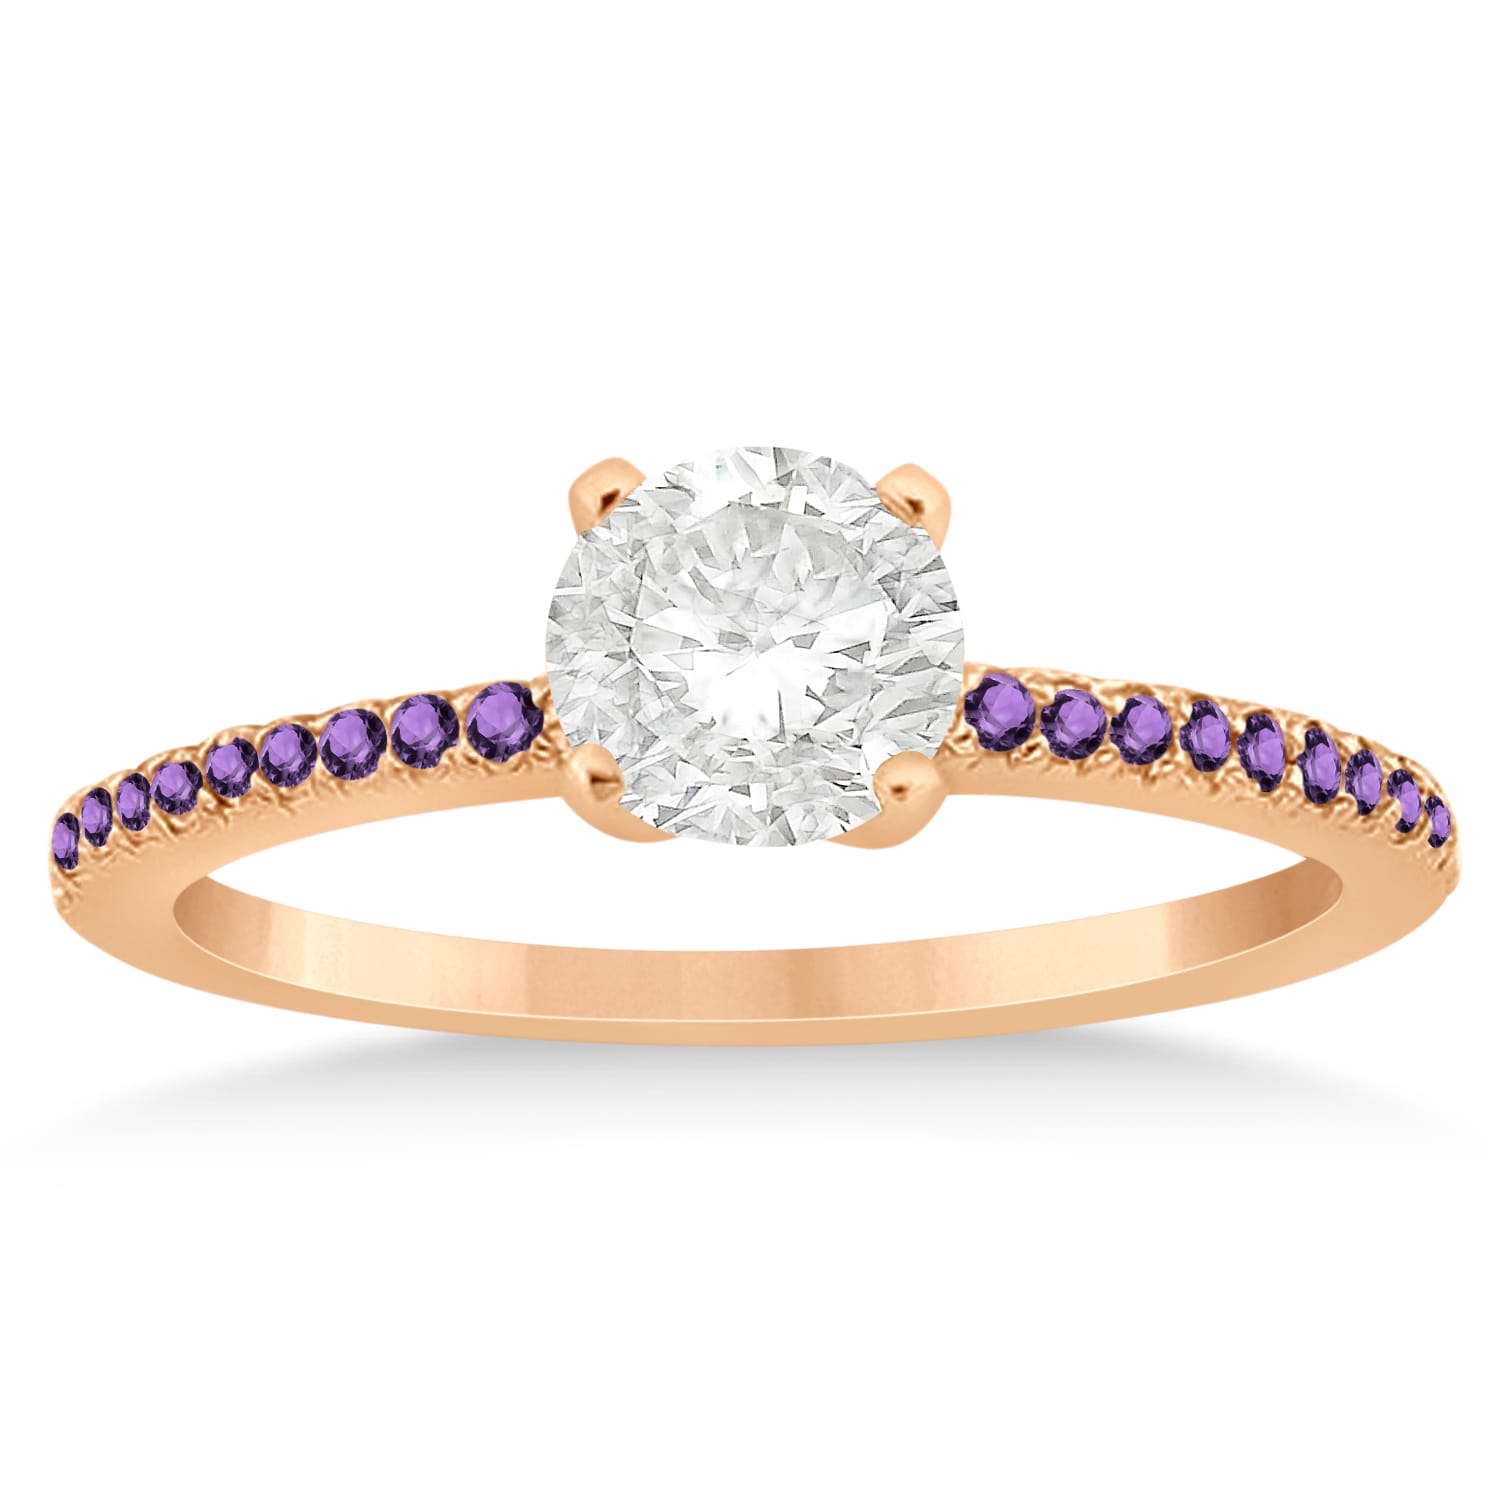 Amethyst Accented Engagement Ring Setting 14k Rose Gold 0.18ct